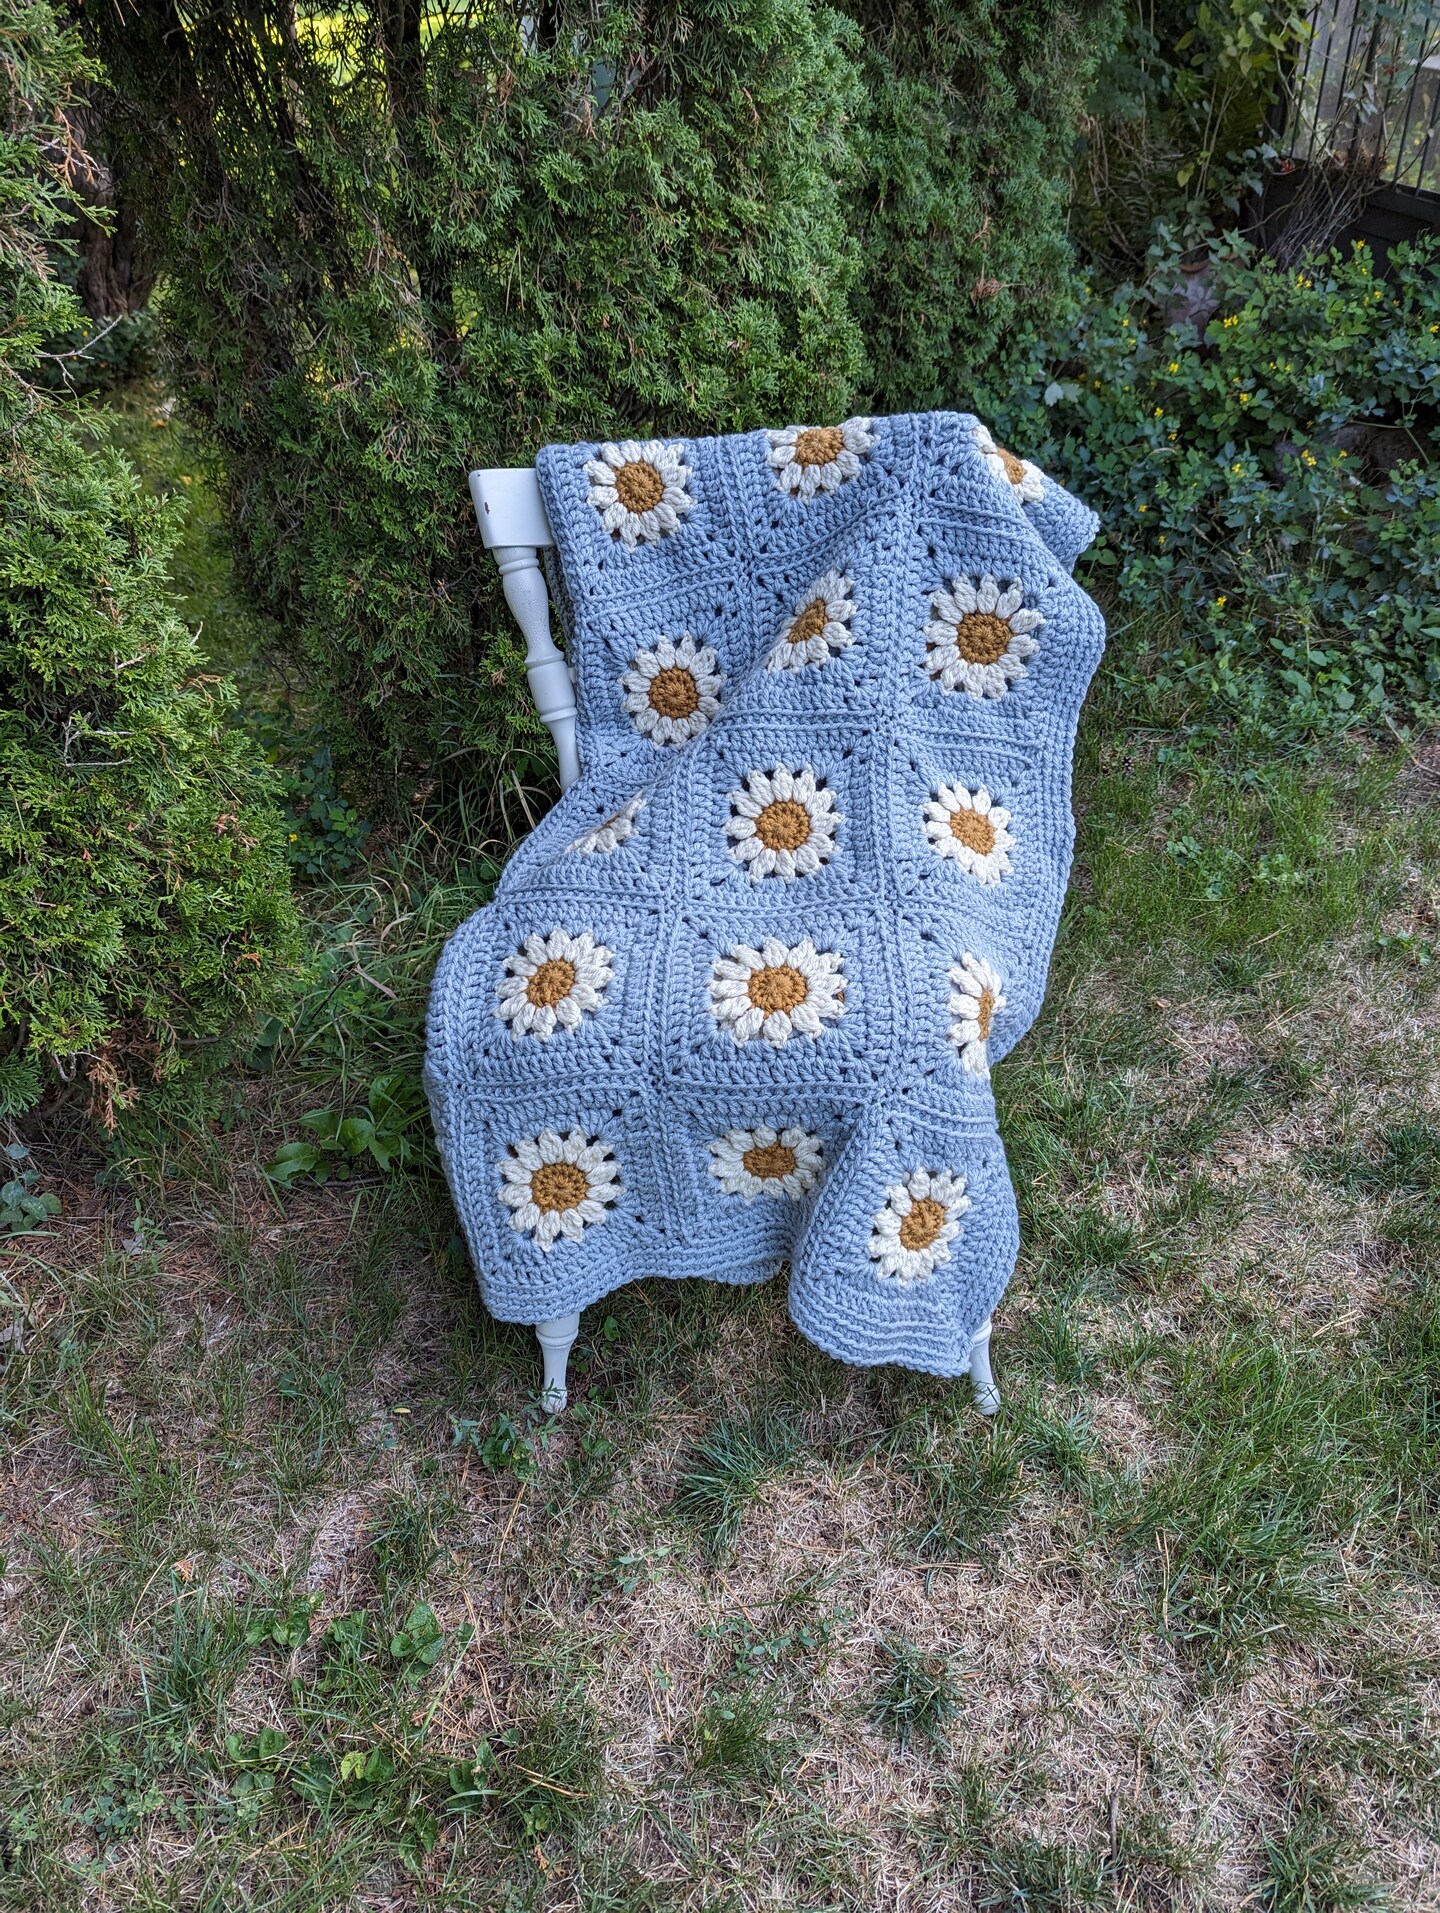 How to Crochet A Granny Square Blanket - Daisy Cottage Designs